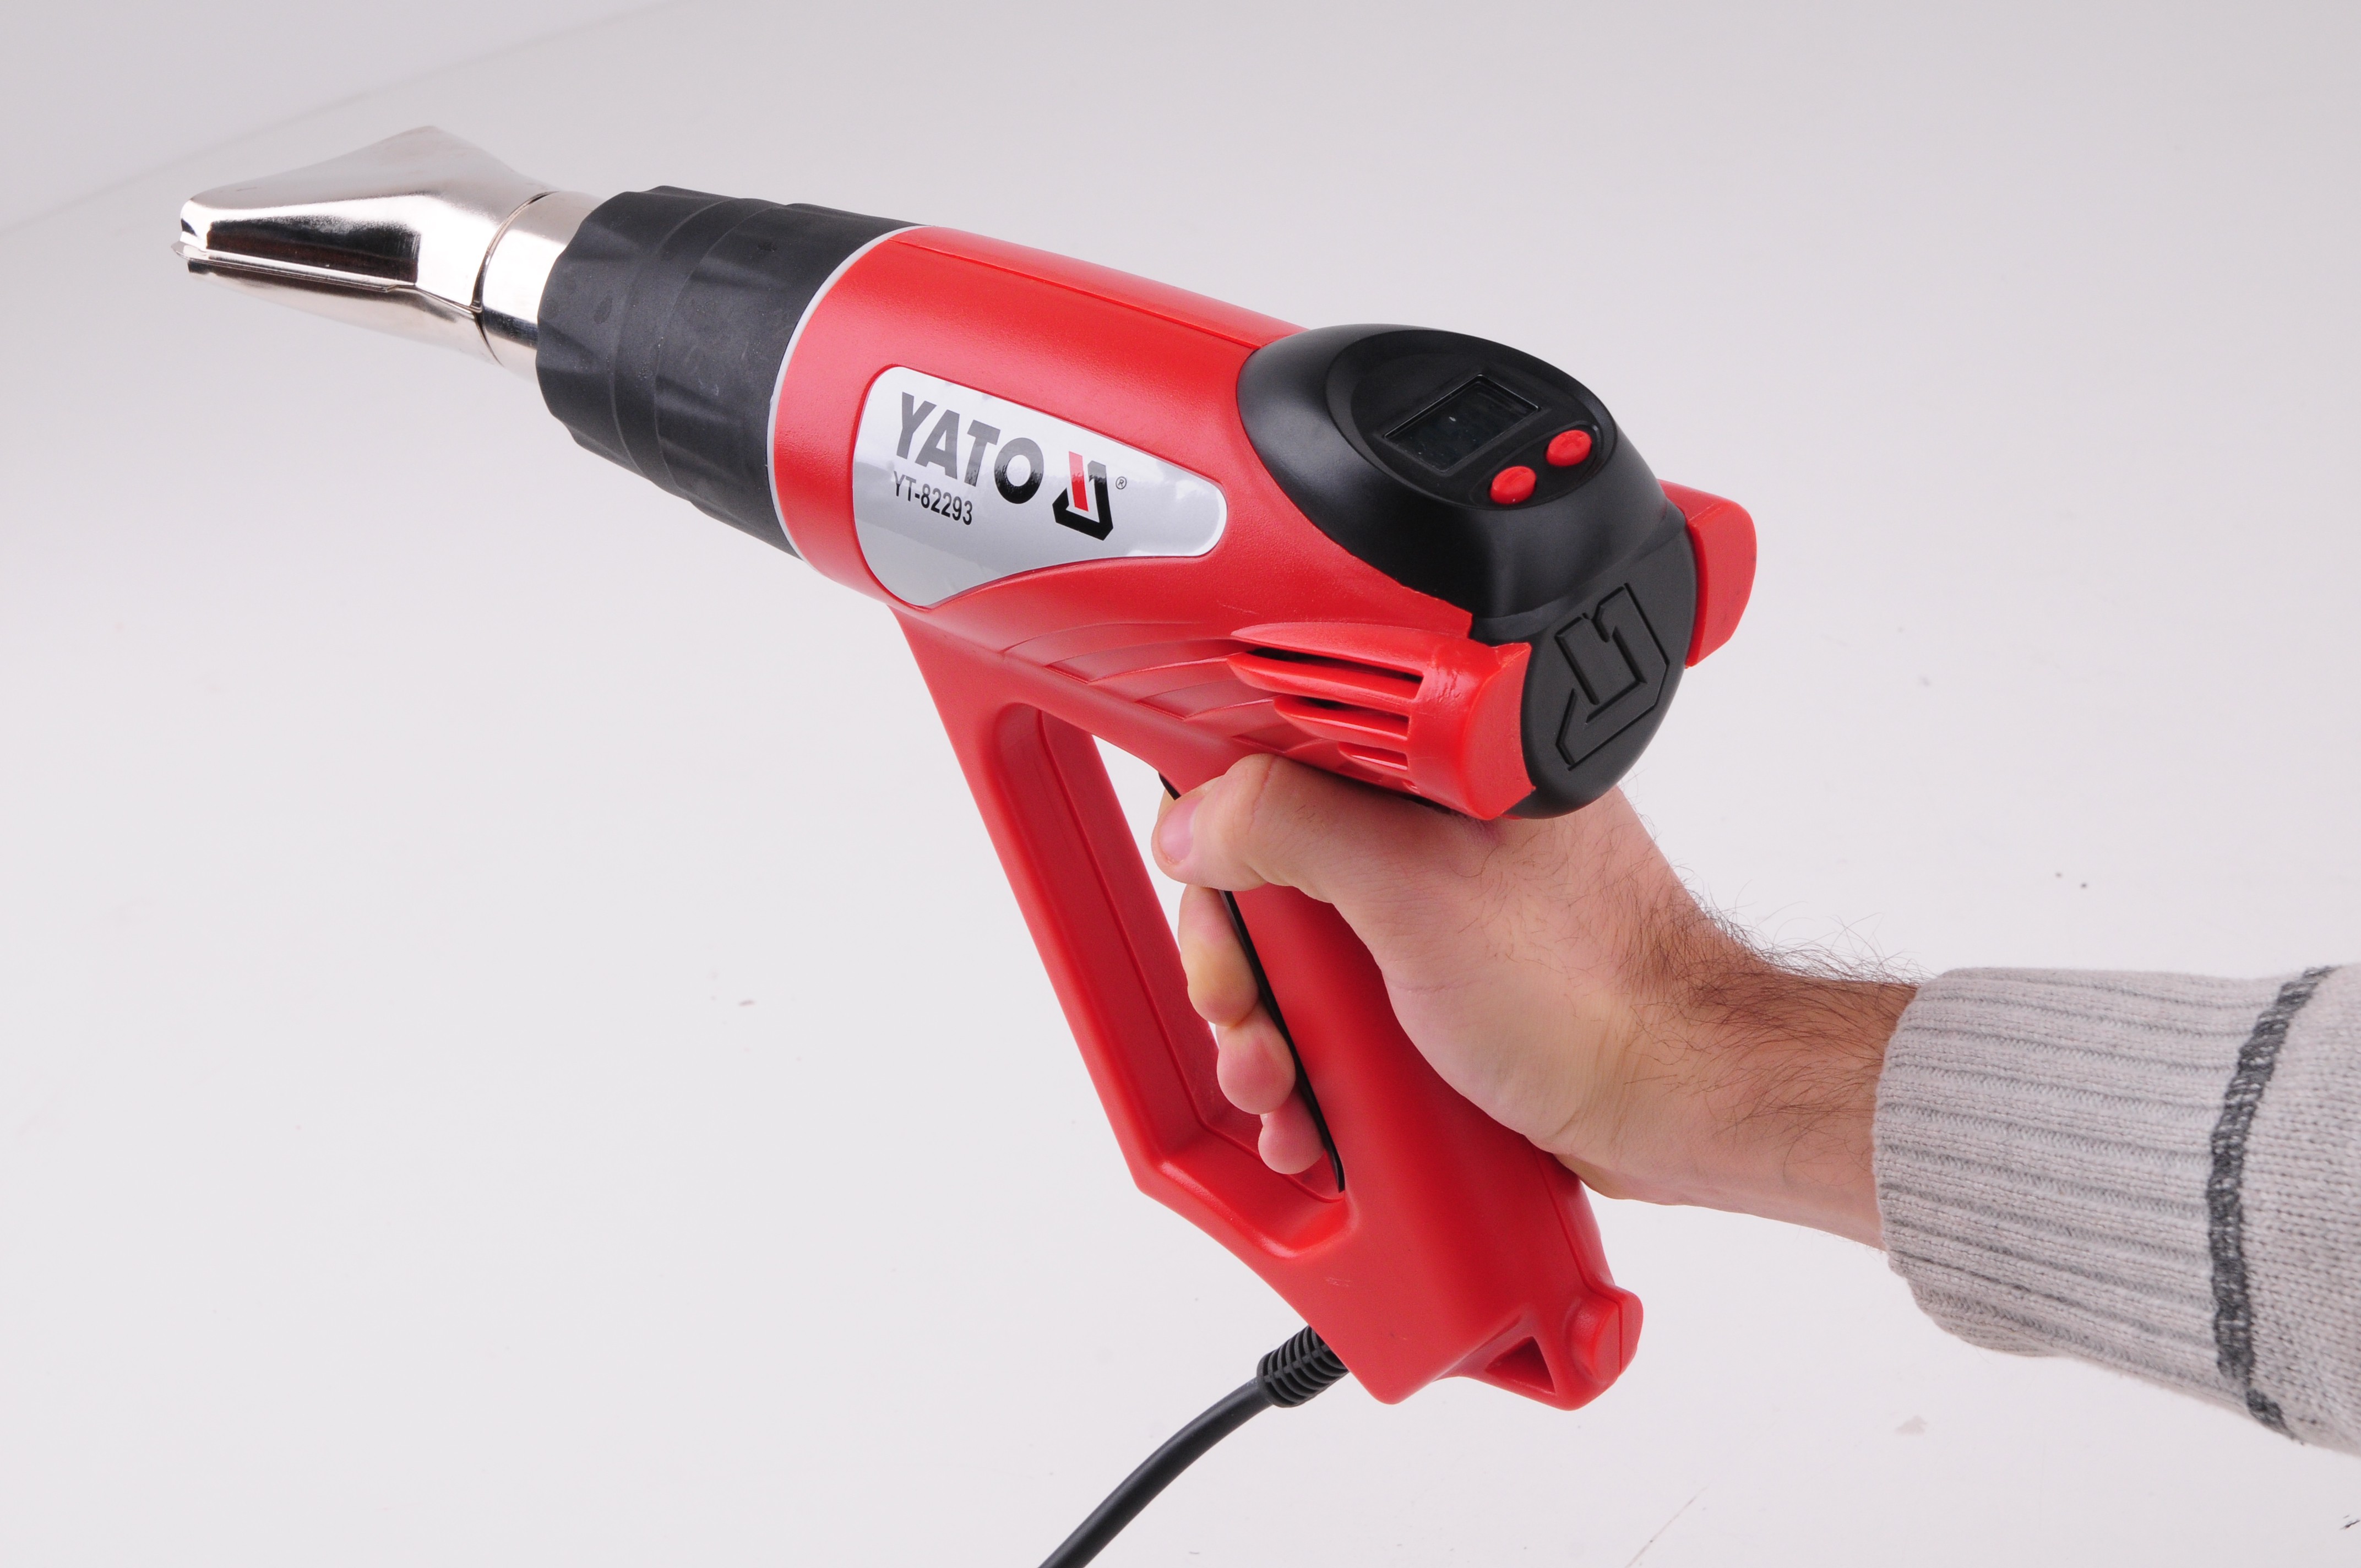 YATO HOT AIR GUN WITH ACCESSORIES POWER & GASOLINE TOOLS POWER TOOL YT-82293